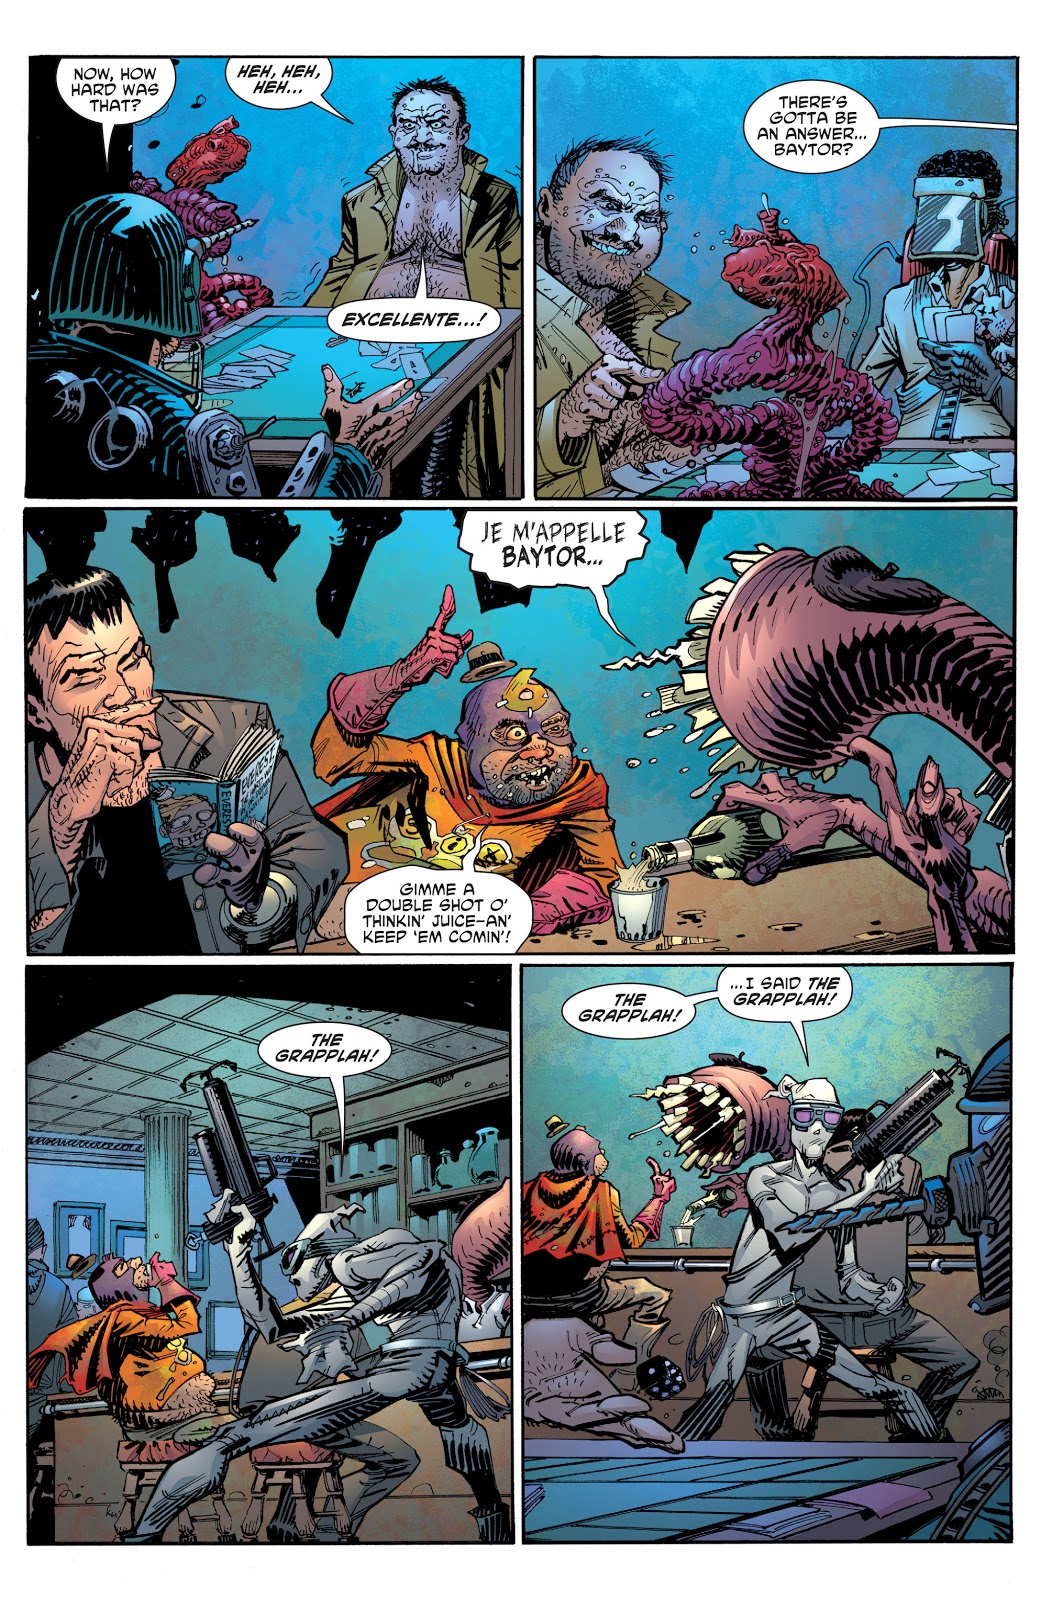 All-Star Section Eight review